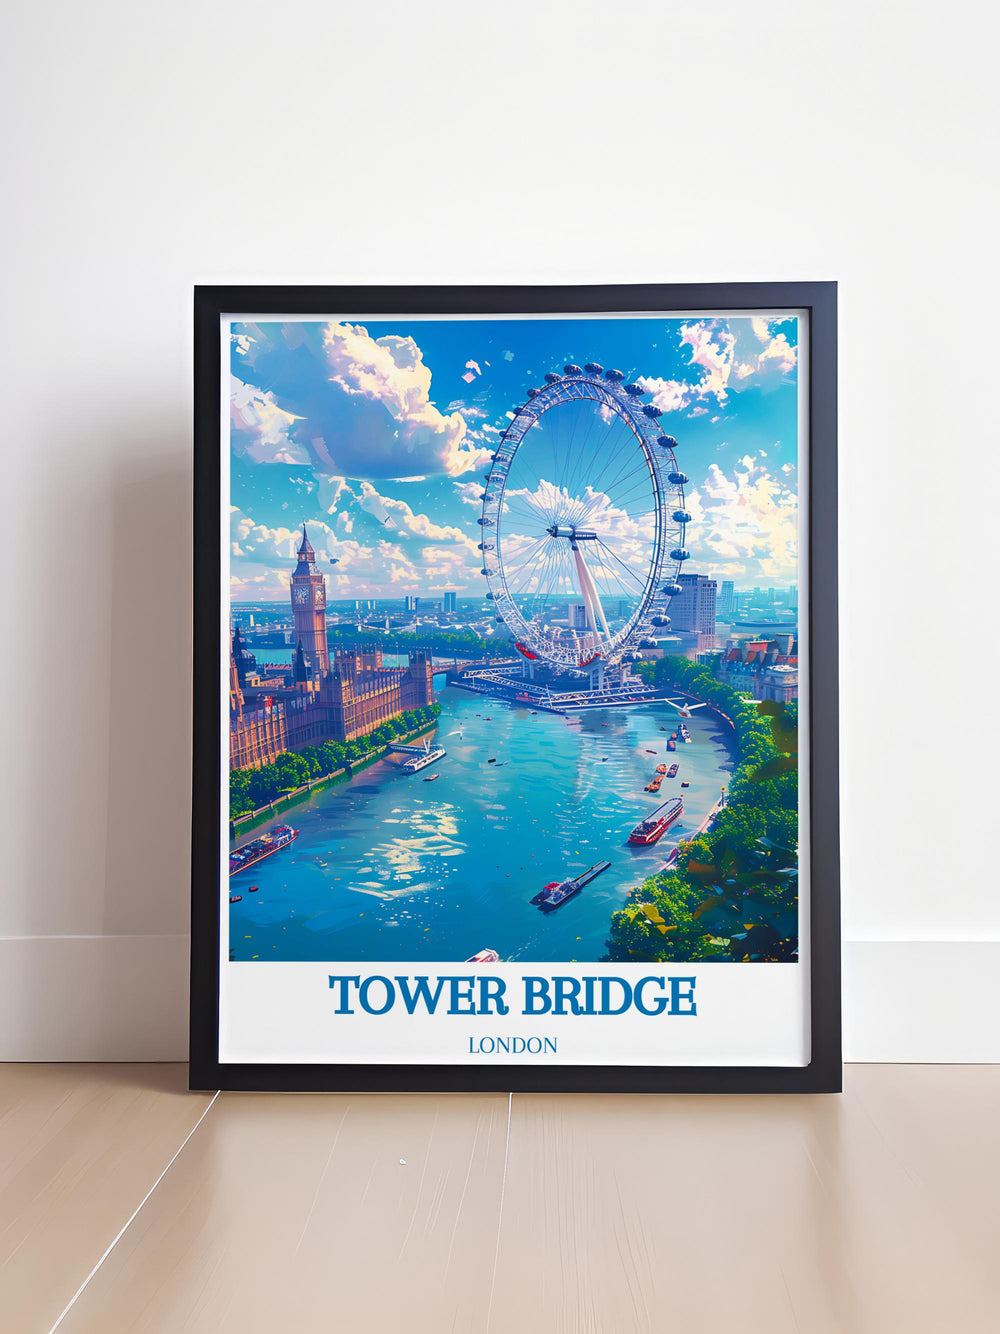 Modern wall decor featuring iconic English landmarks blended with contemporary artistic styles.